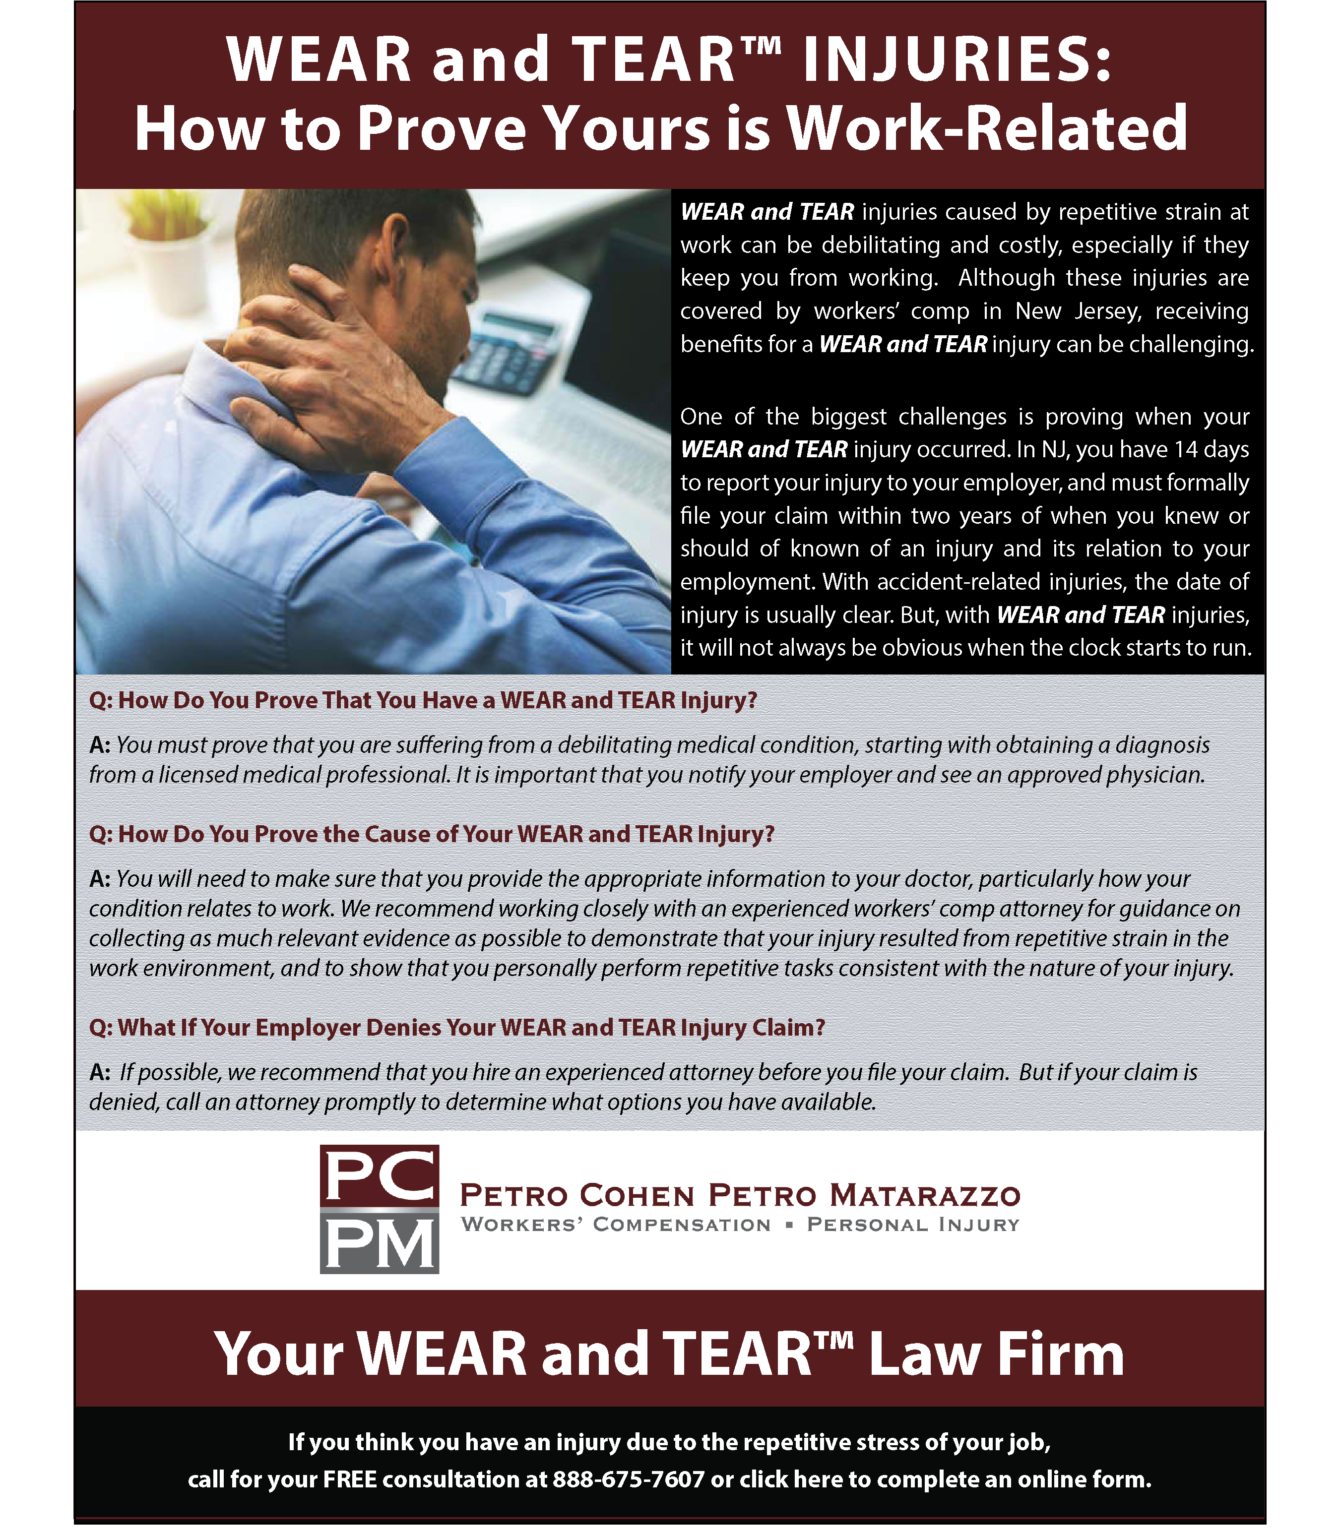 How Do You Prove That a WEAR and TEAR Injury Is WorkRelated? New